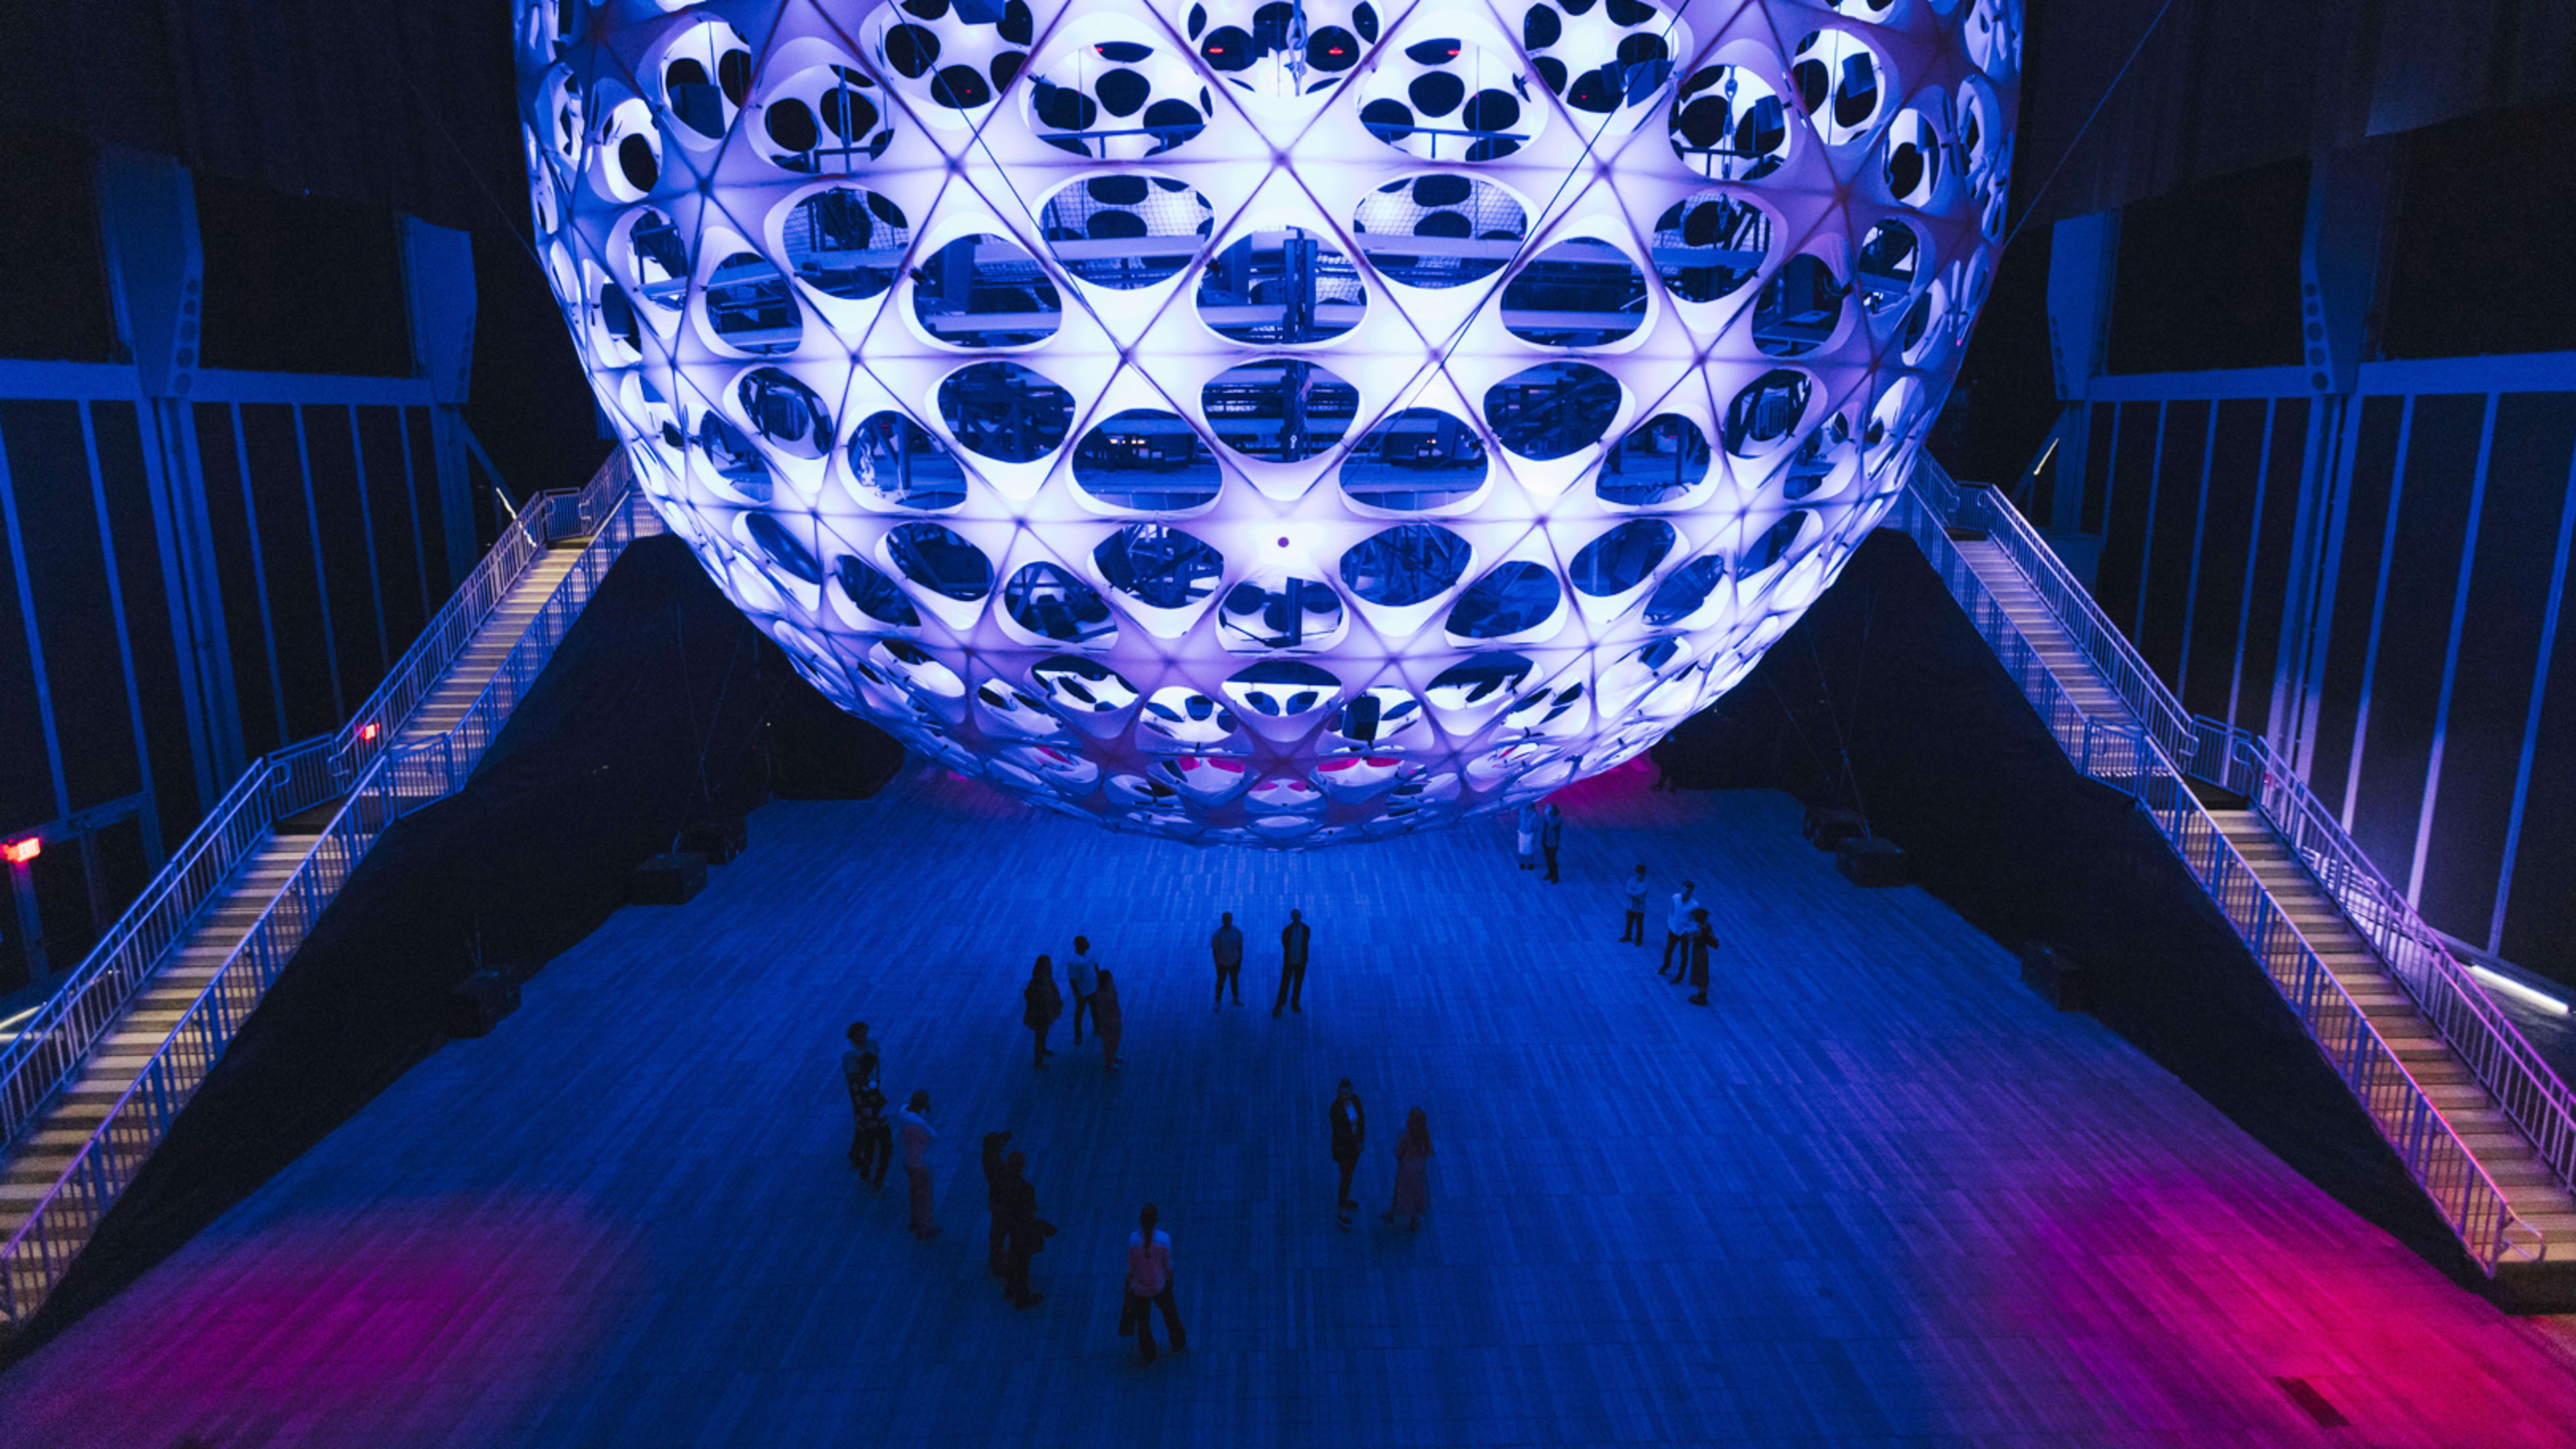 How this giant, glowing sphere became the show of the summer